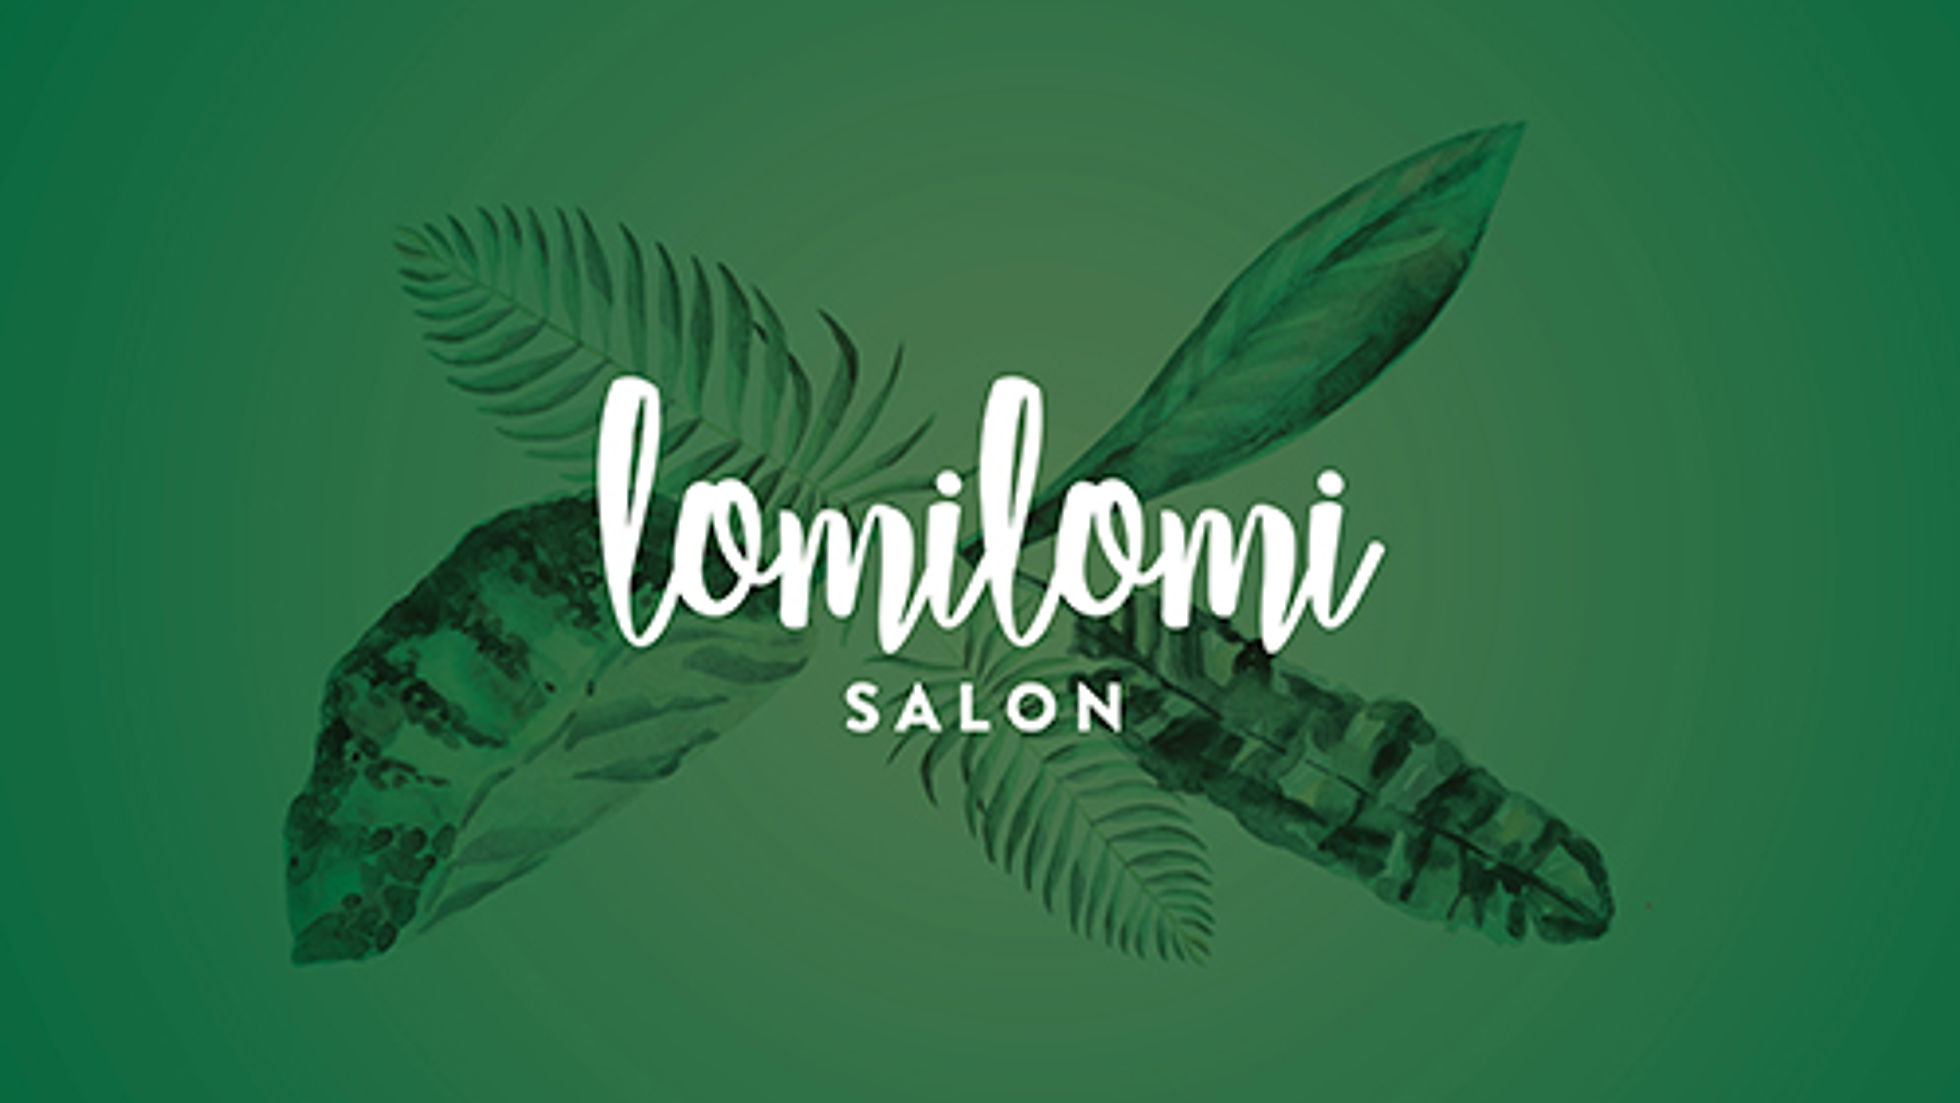 lomilomi.salon by Theres Gahleitner